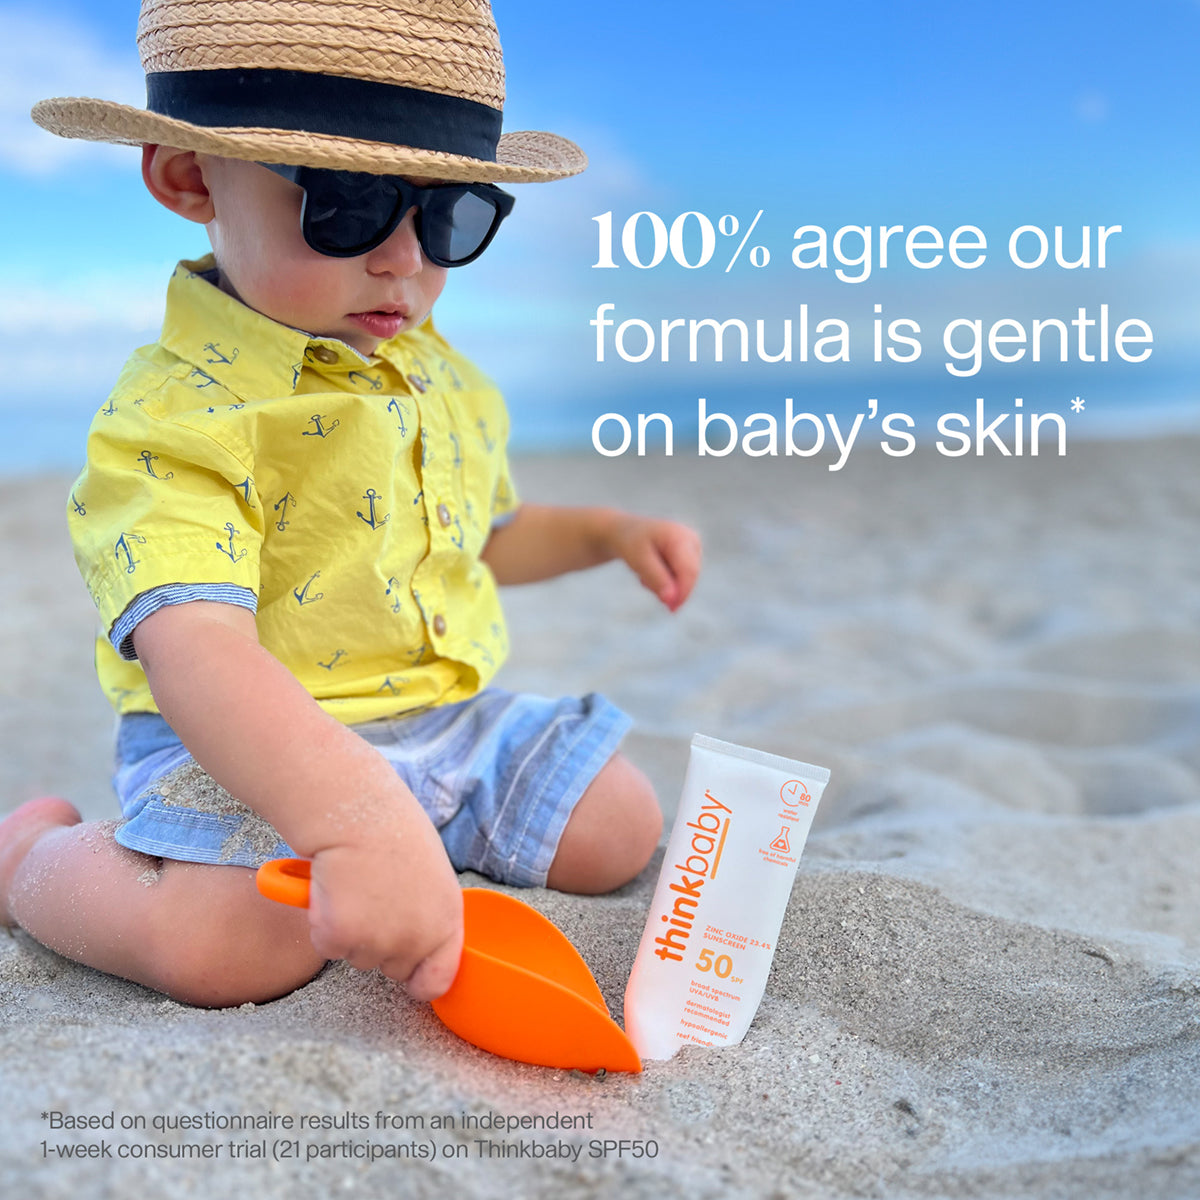 A toddler on a beach, wearing a hat and sunglasses, sitting next to a Thinkbaby sunscreen tube with text stating &quot;100% agree it&#39;s gentle on baby’s skin&quot;.